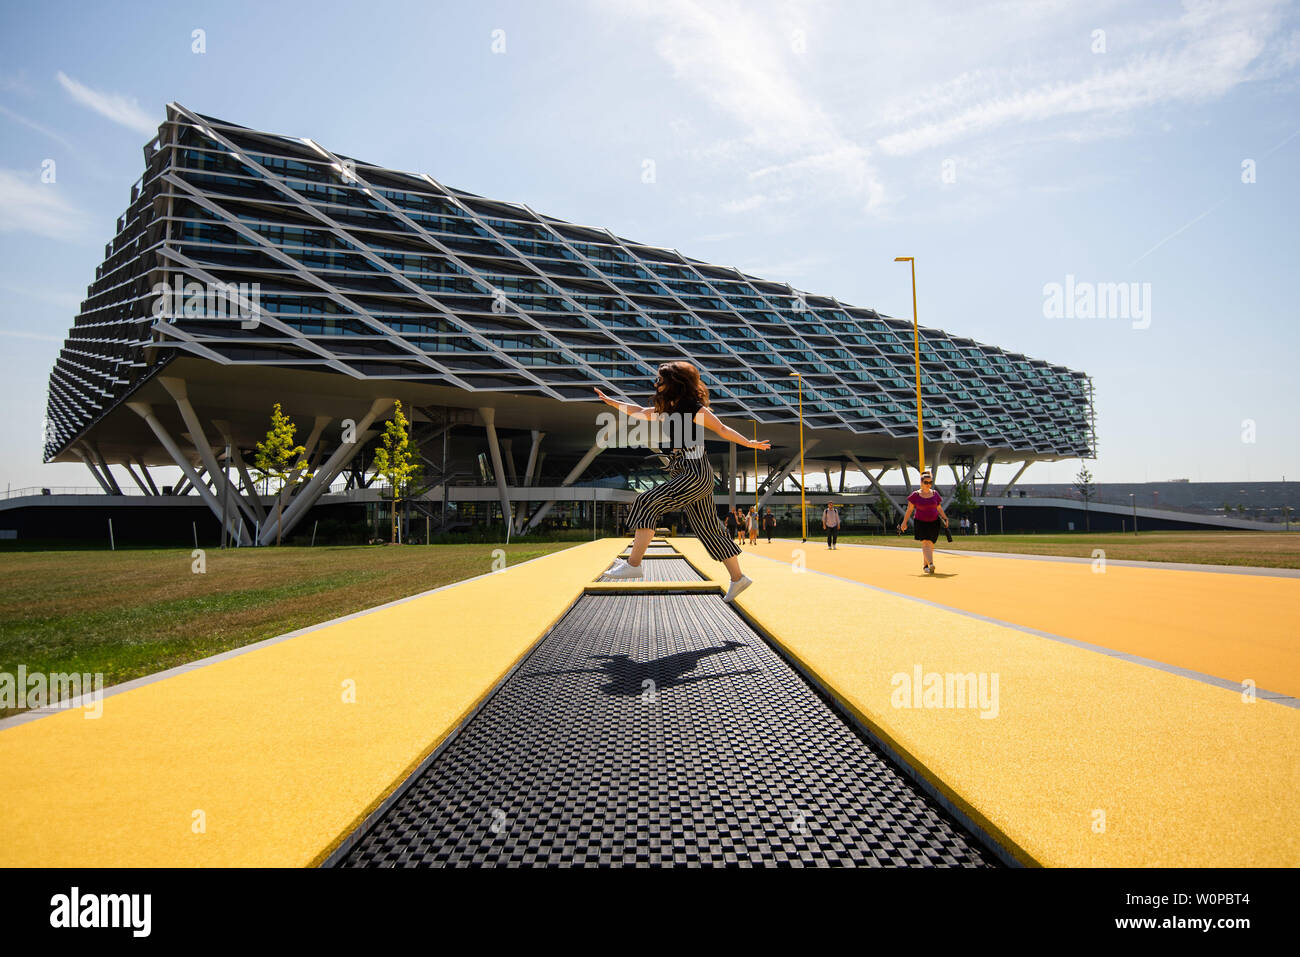 Herzogenaurach, Germany. 26th June, 2019. The new office building "Arena" by Adidas. Trampolines for the employees are incorporated the path. In the 70th year of its existence, the sporting goods manufacturer